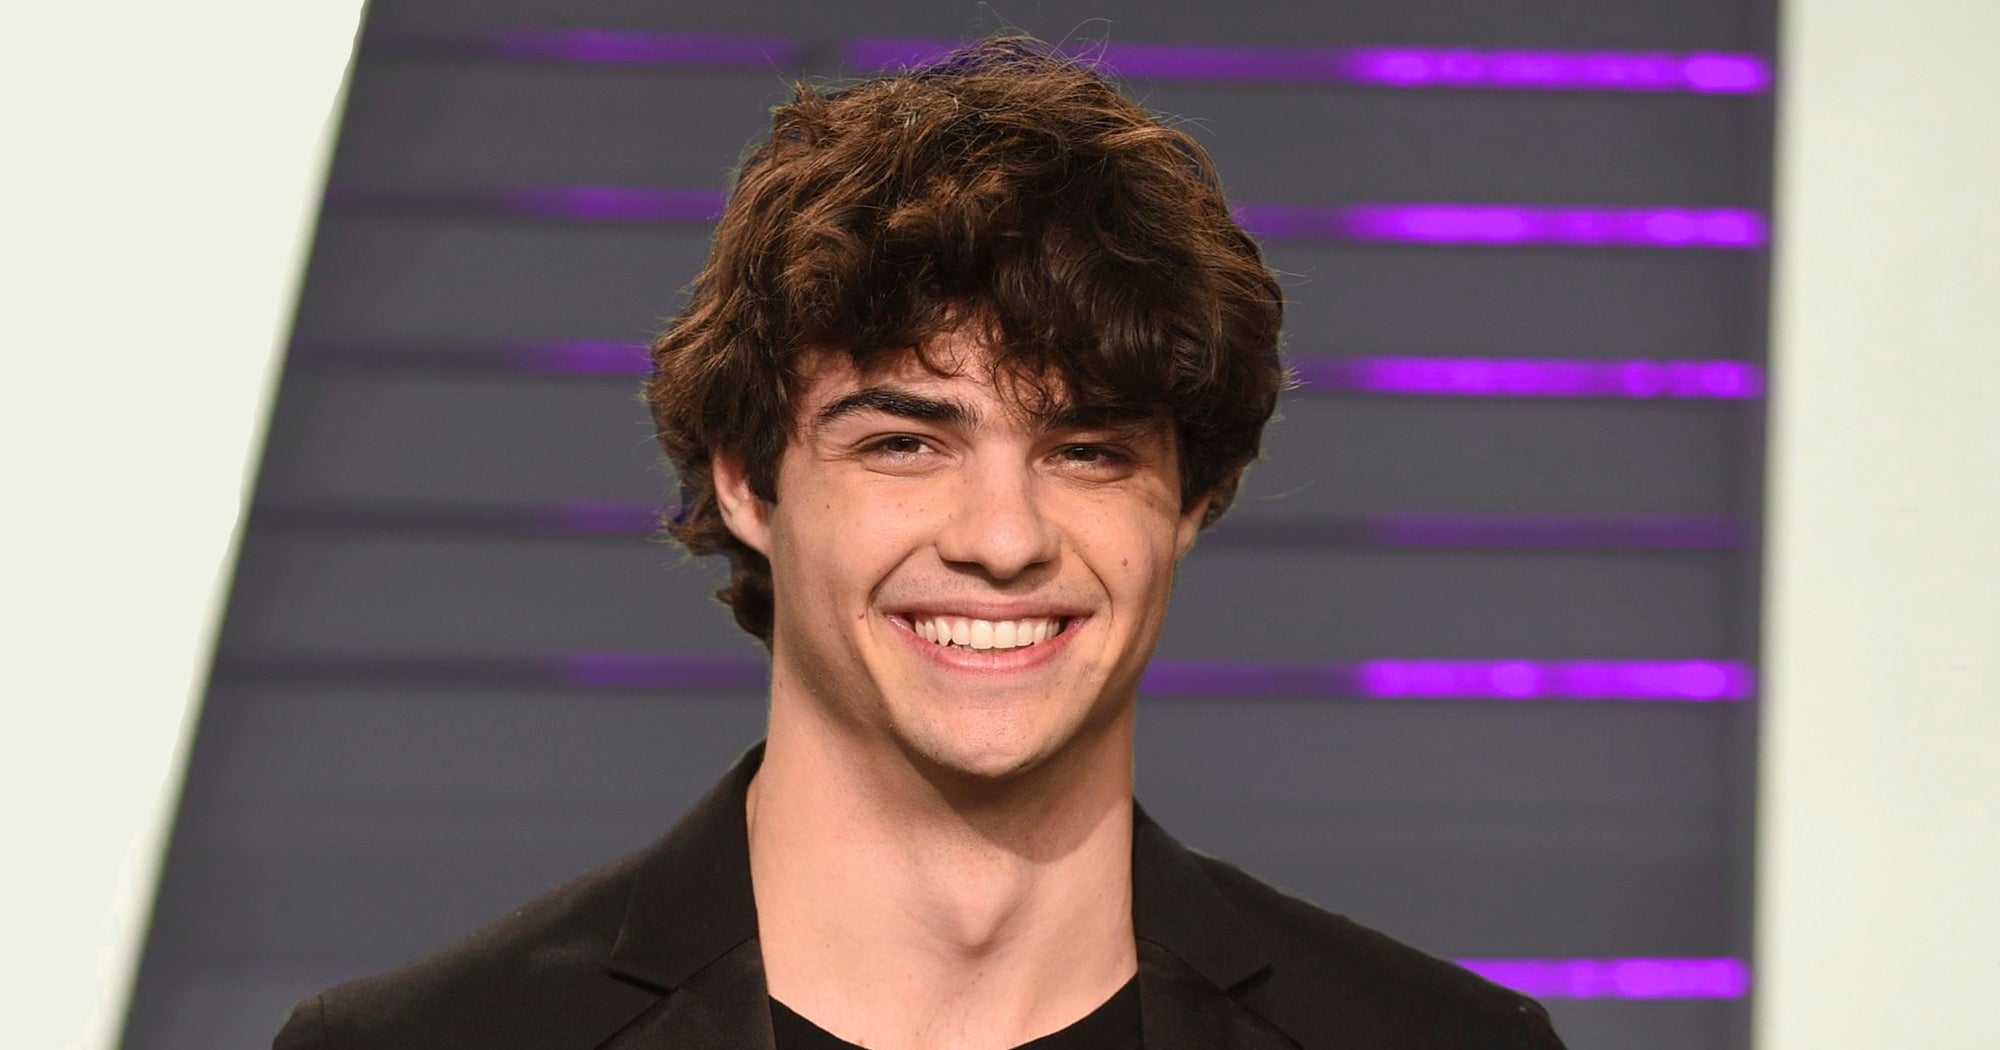 Noah Centineo And Model Alexis Ren, Dating Rumors